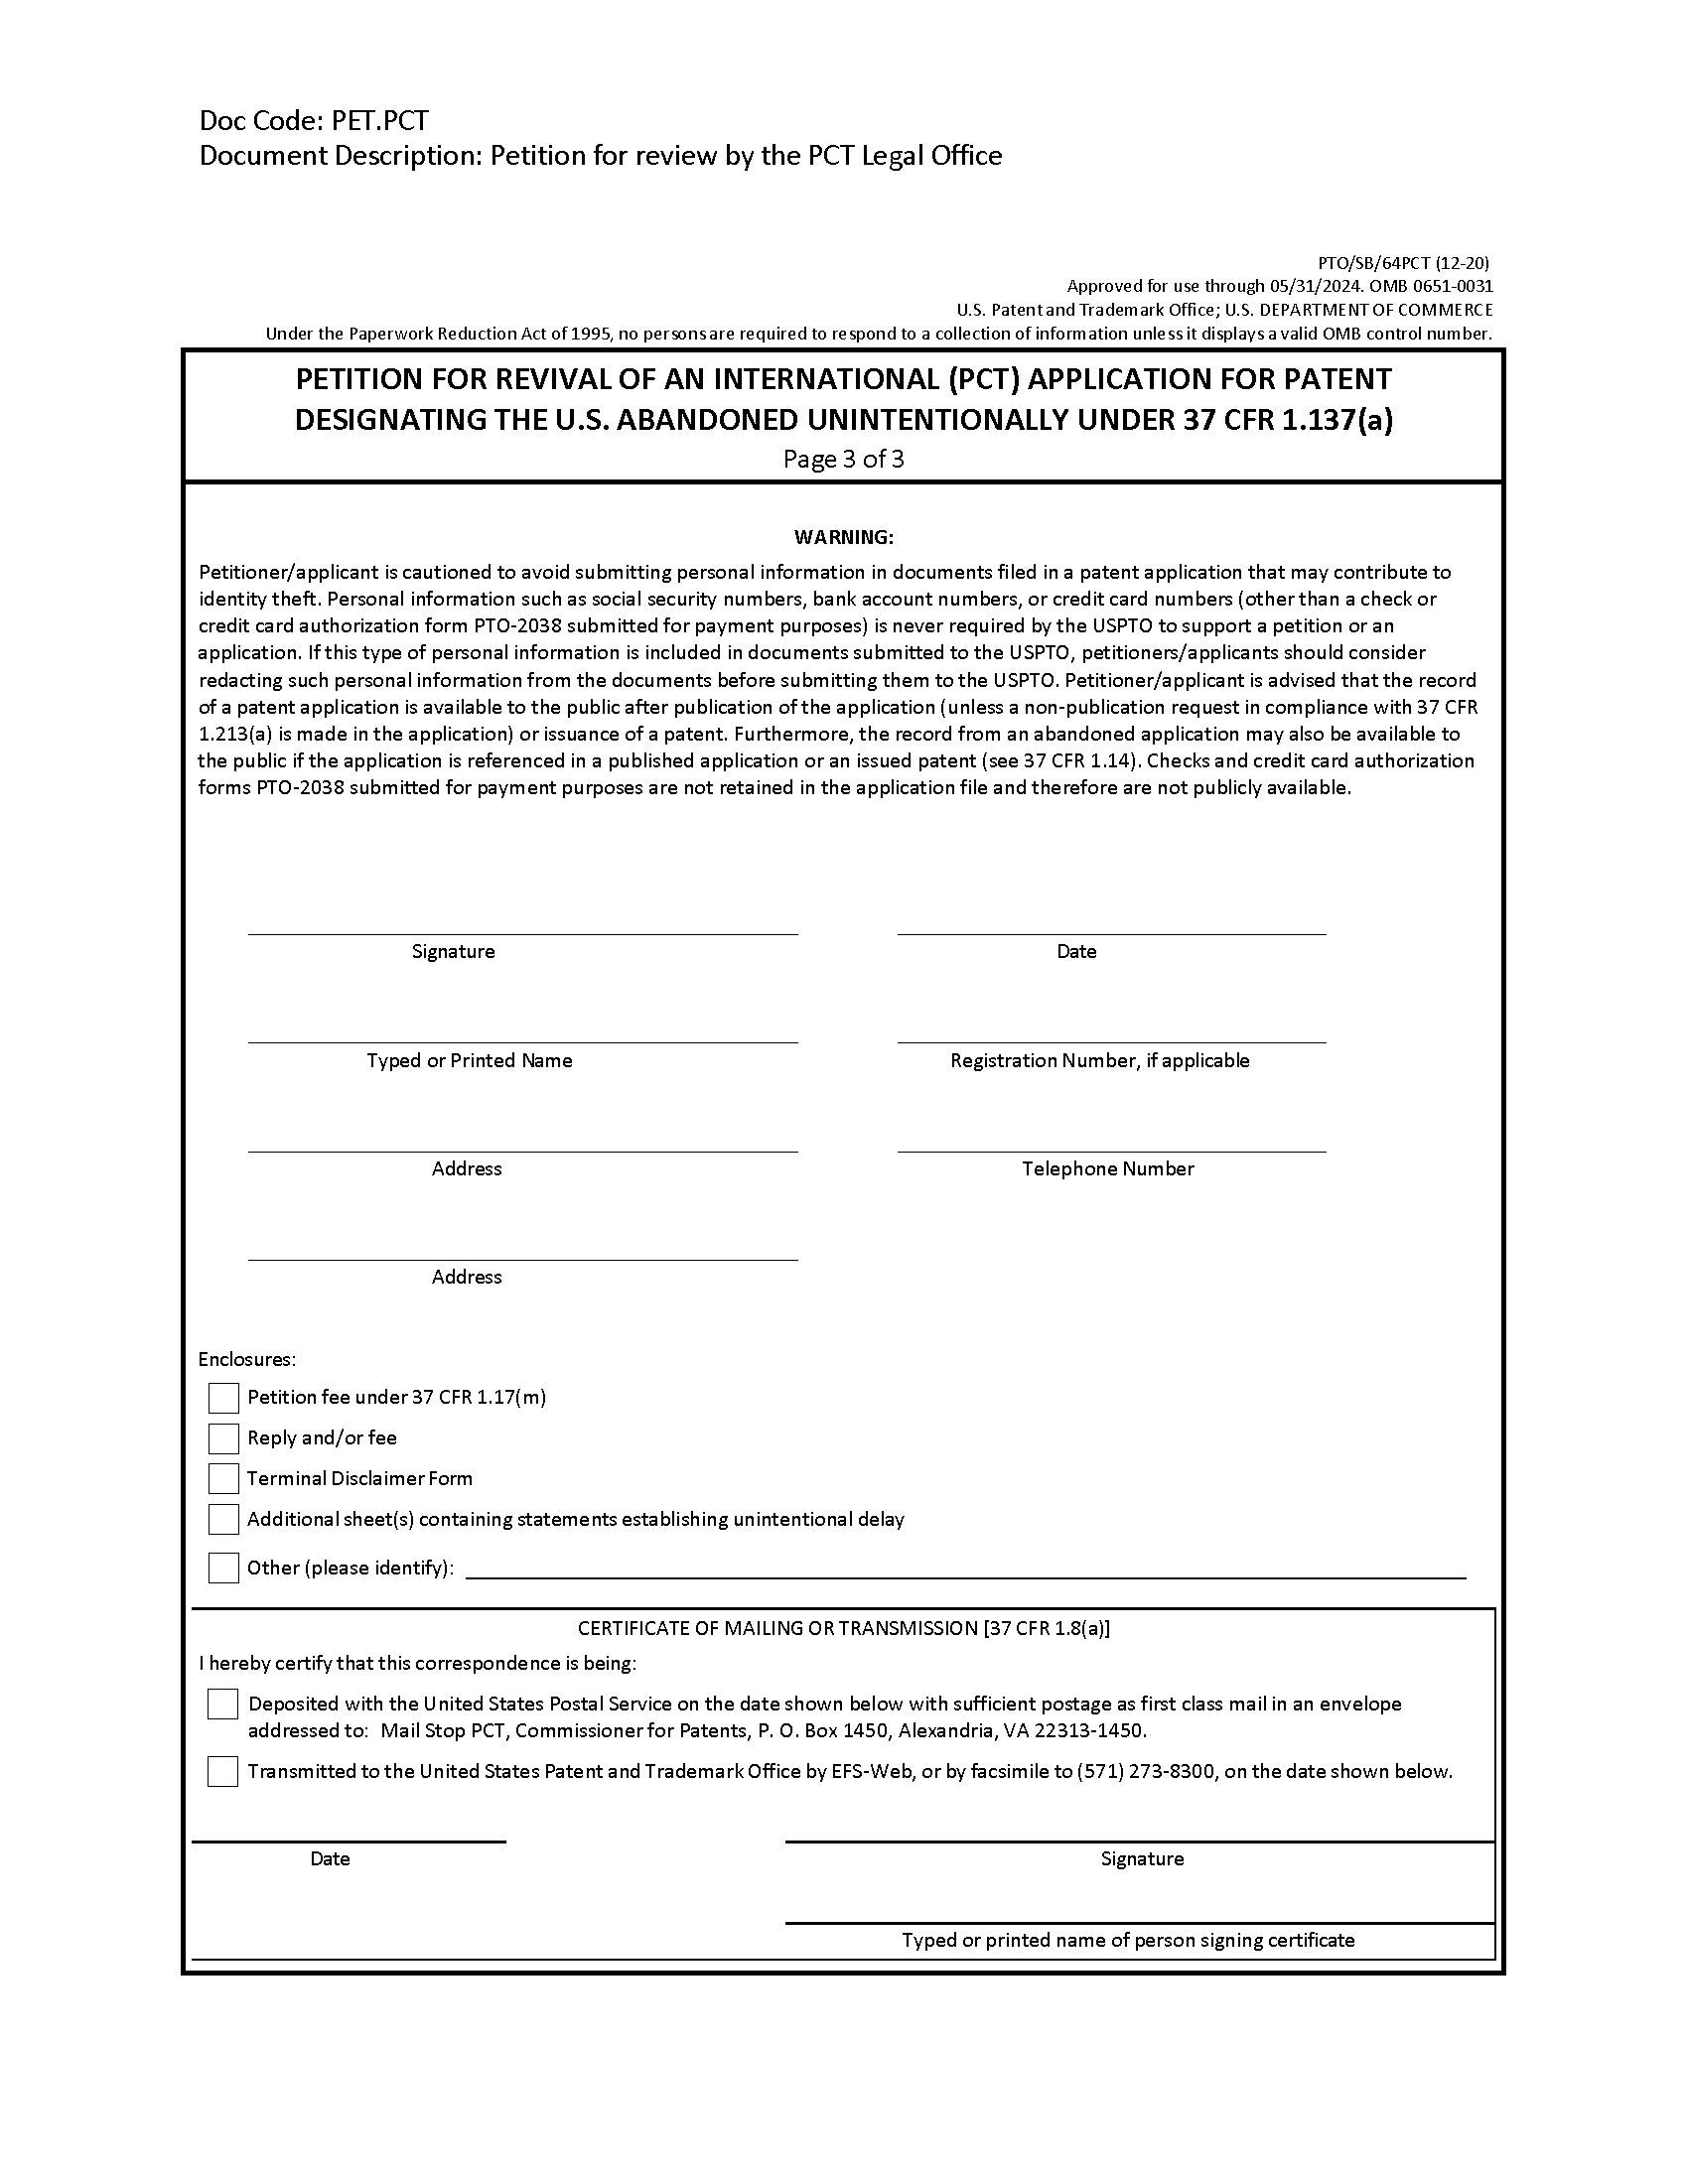 Form PTO/SB/64/PCT Petition for Revival of an International Application for Patent Designating the U.S. Abandoned Unintentionally Under 37 CFR 1.137(b) [Page 3 of 3]